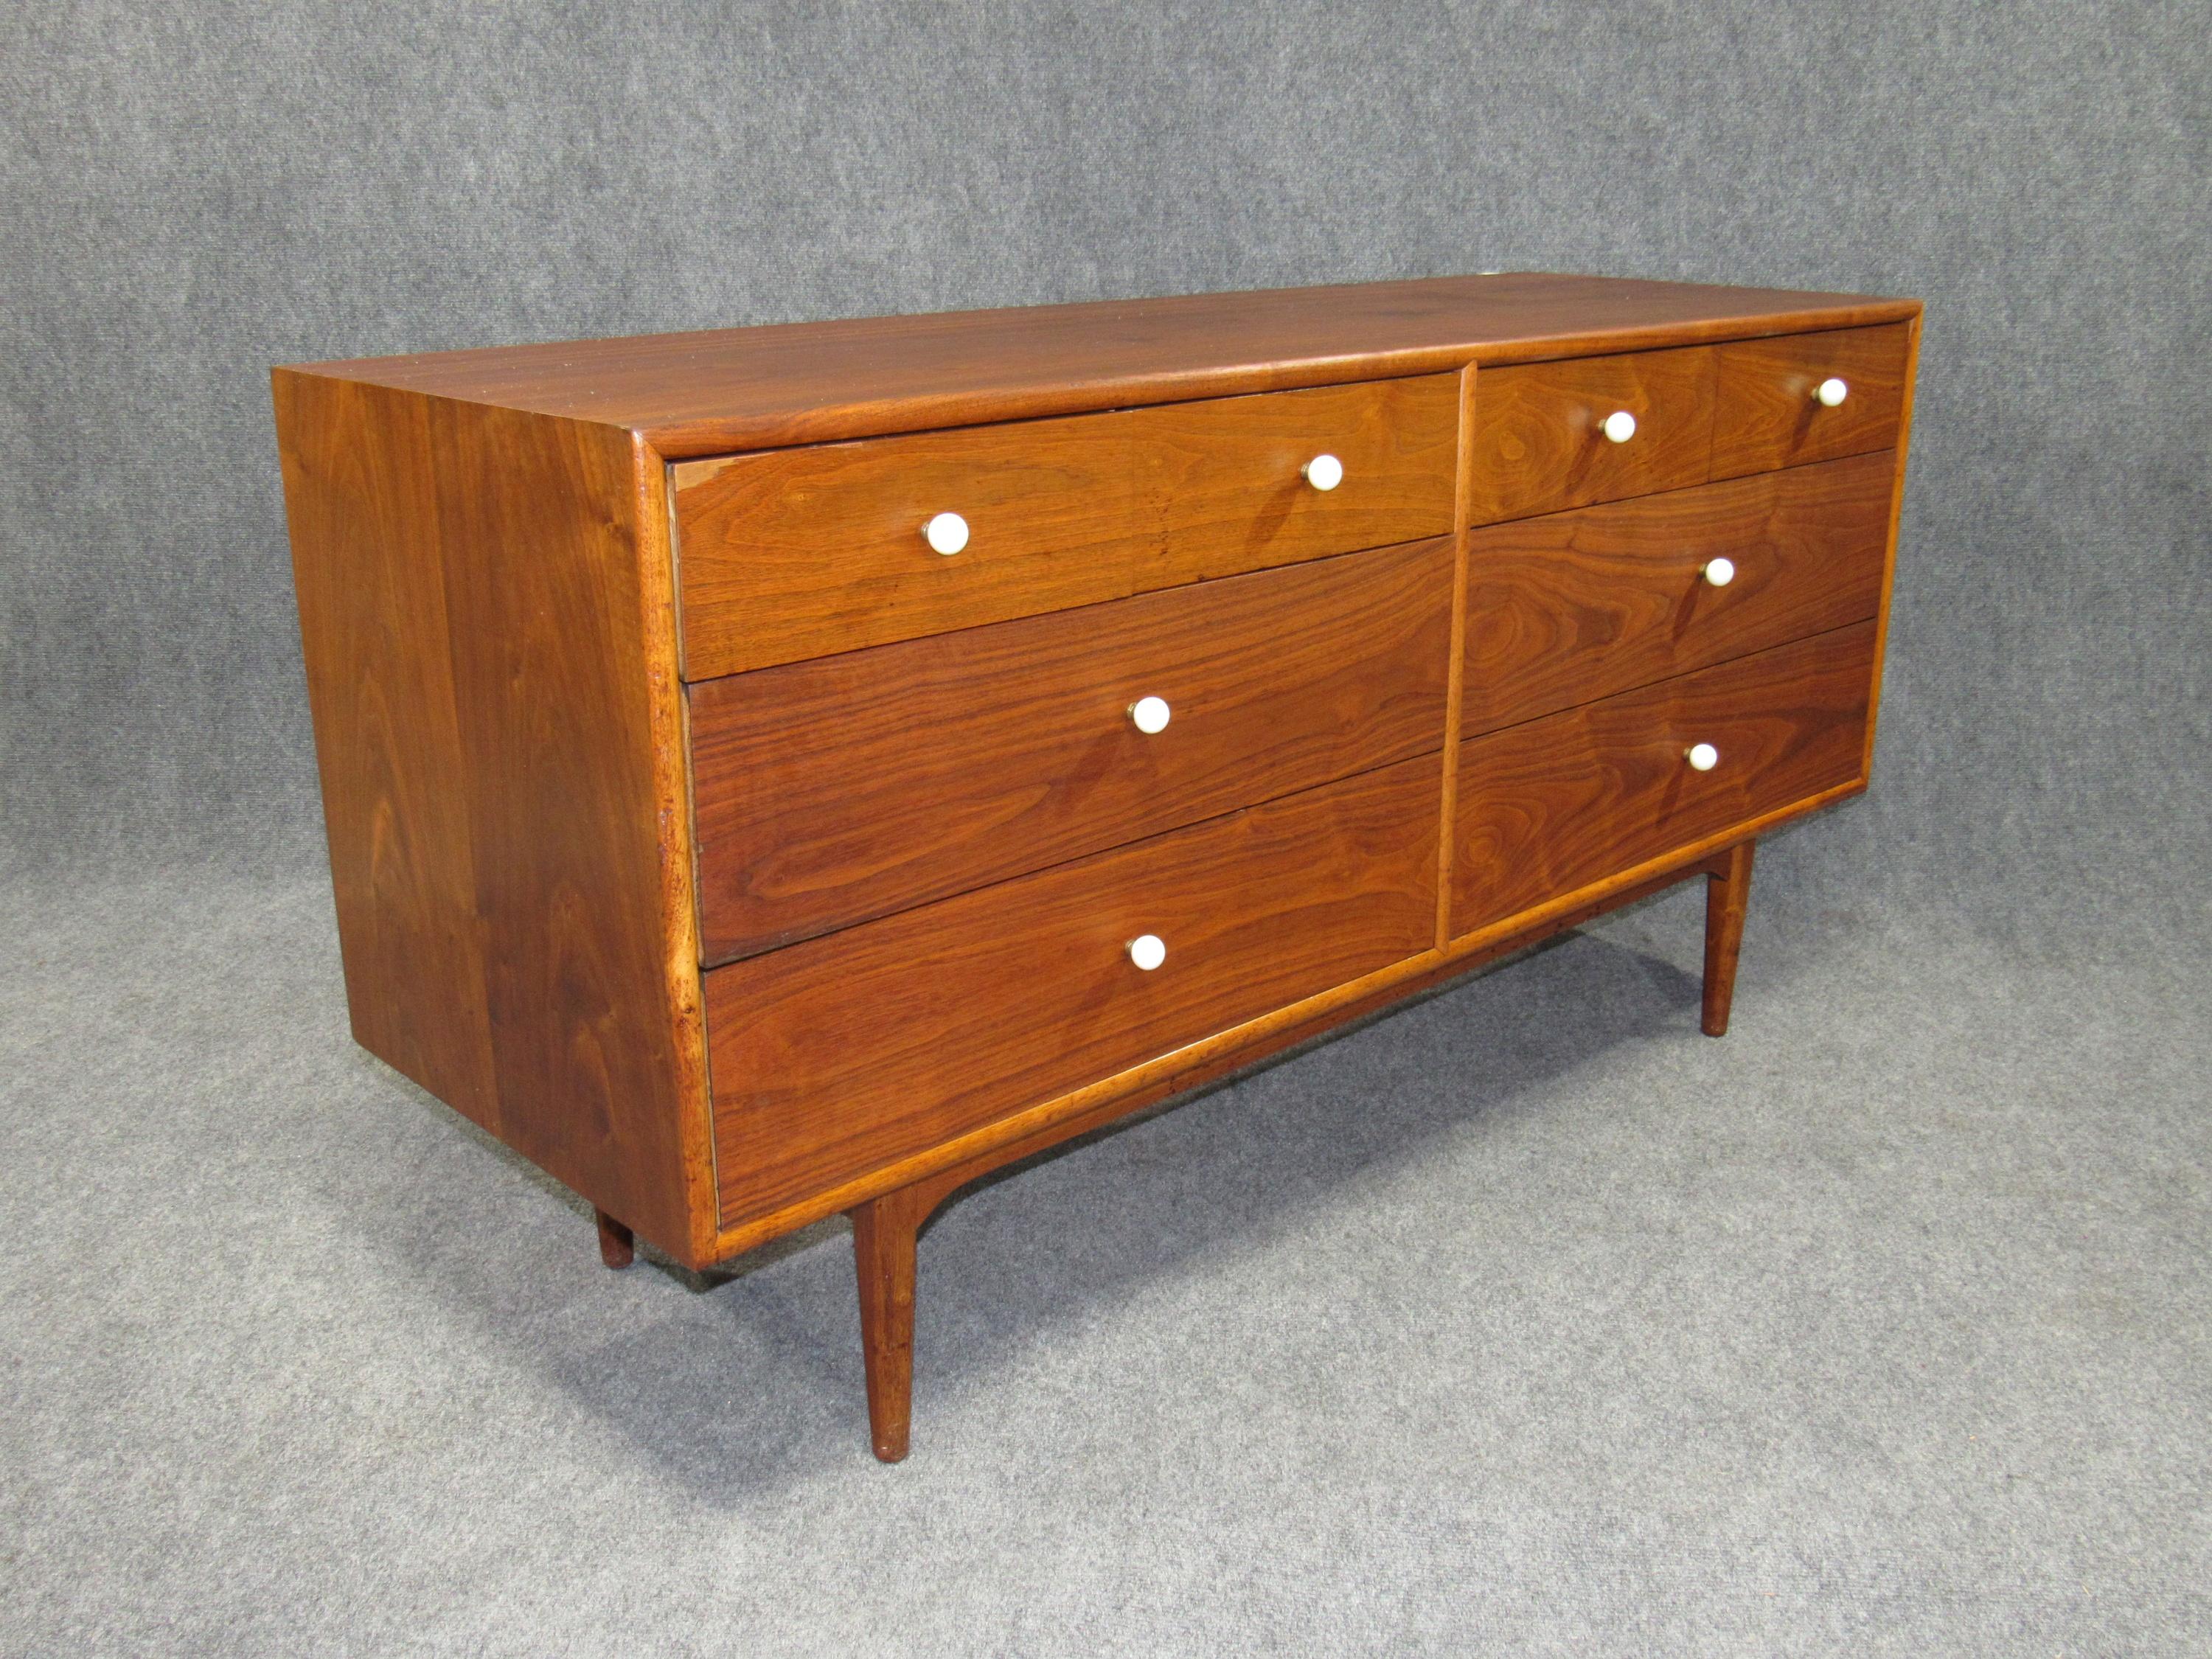 Midcentury Walnut Low and Long Chest of Drawers by Kipp Stewart for Drexel In Good Condition For Sale In Belmont, MA